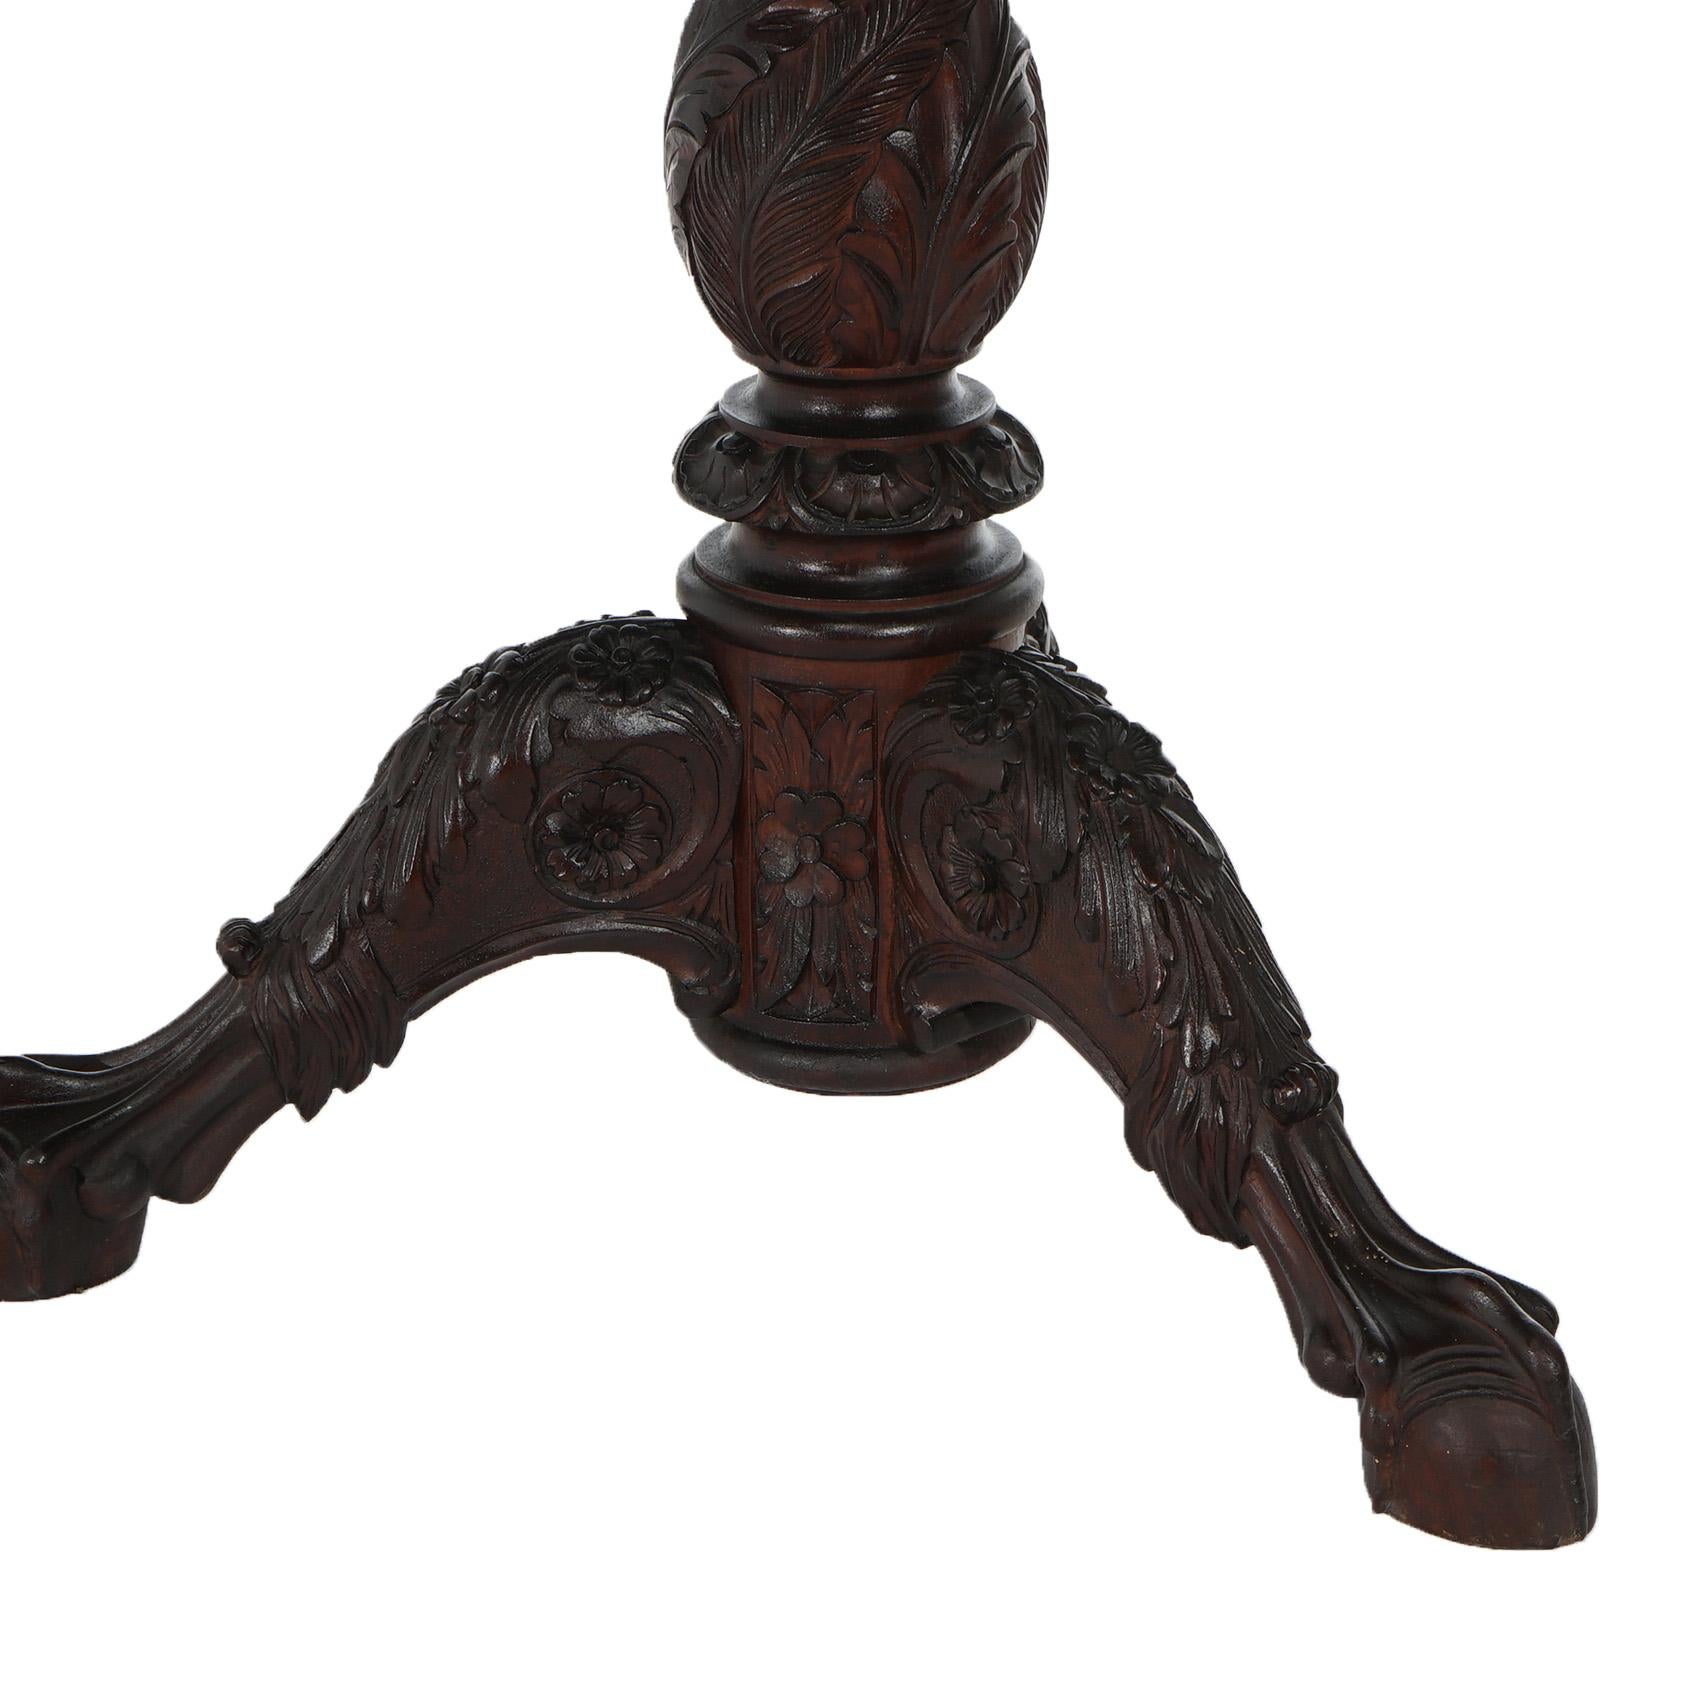 Antique Neoclassical American Empire Carved Mahogany Center Table C1840 For Sale 4